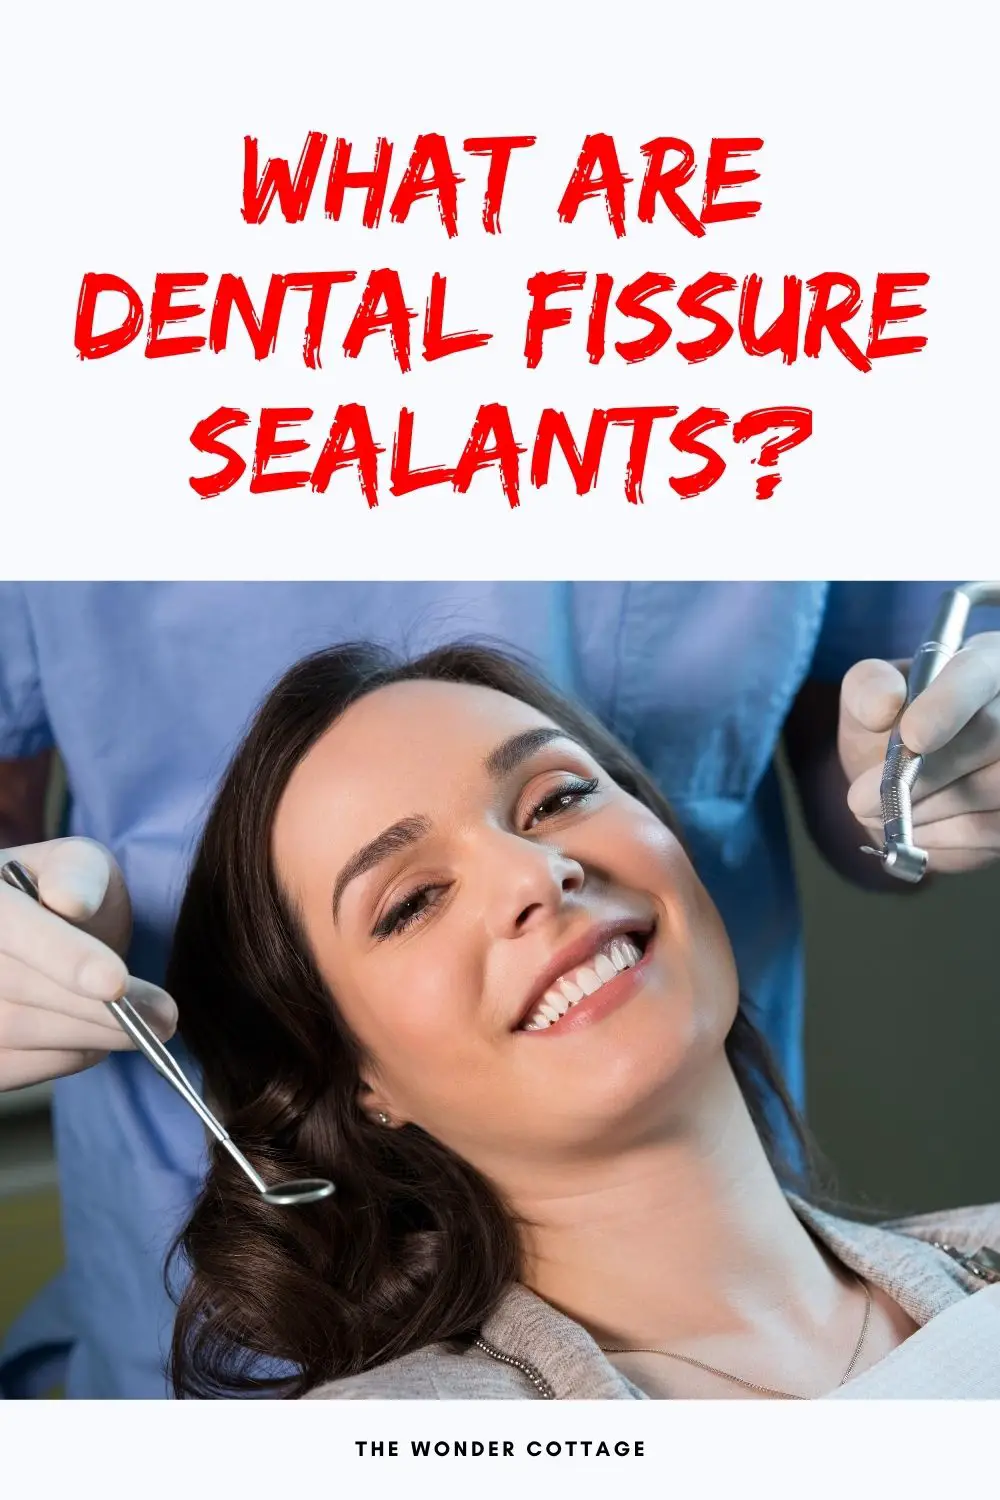 what are dental fissure sealants?